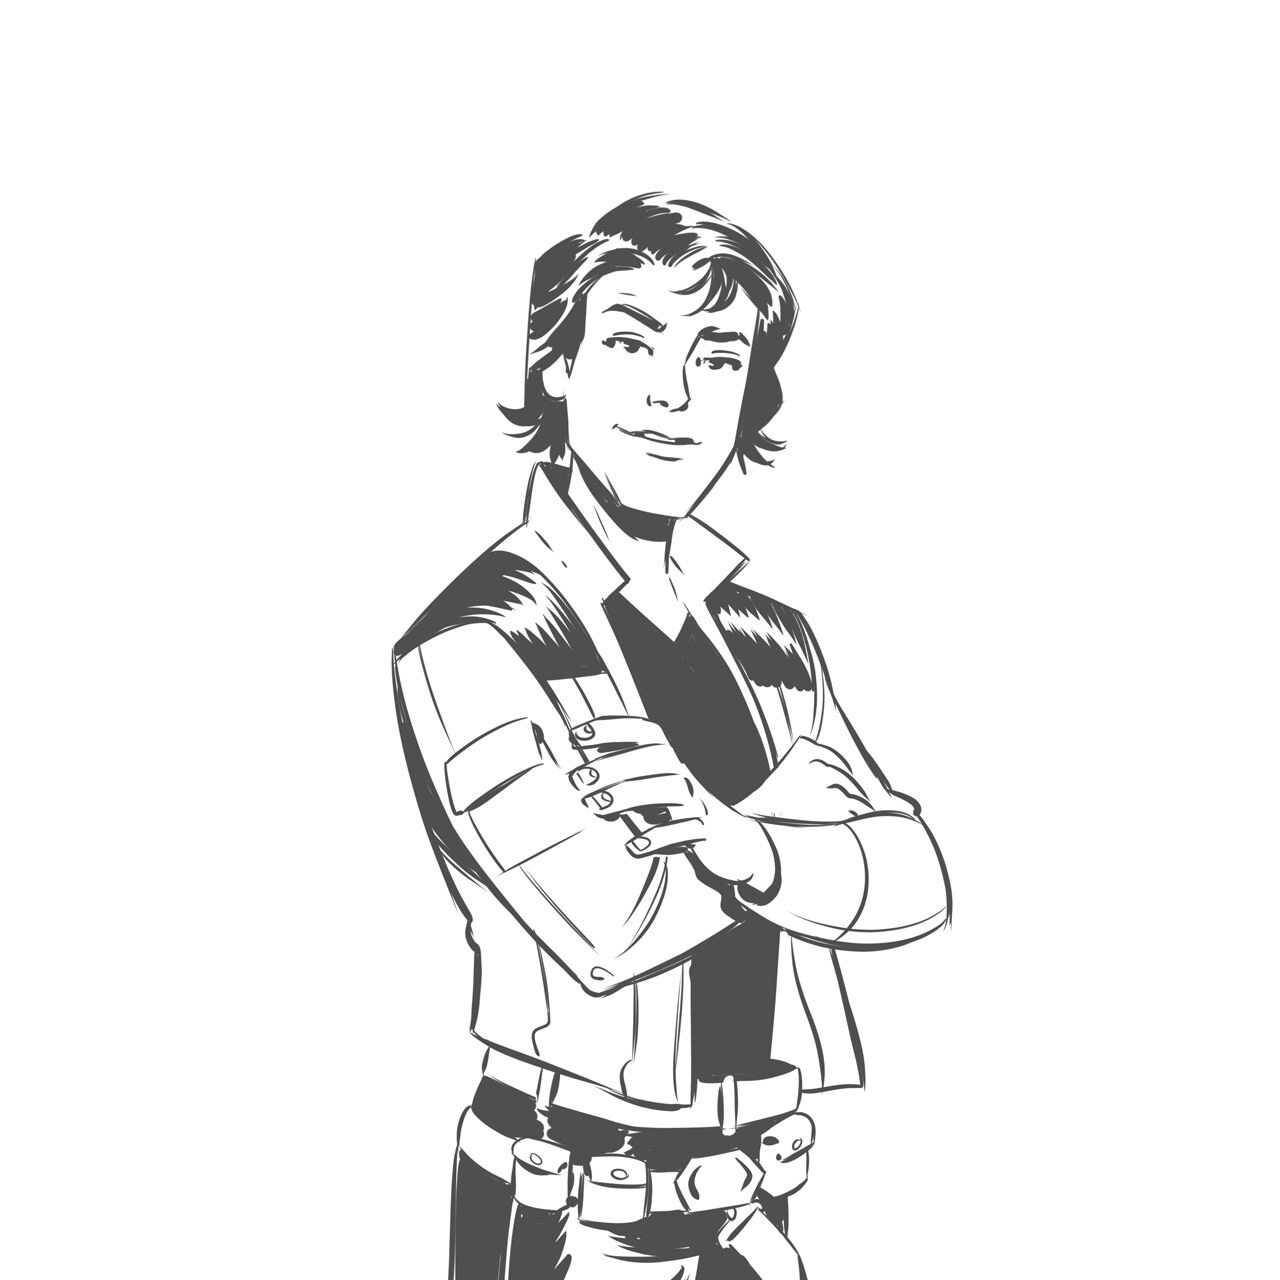 A completed Han Solo drawing with all sketch lines removed.